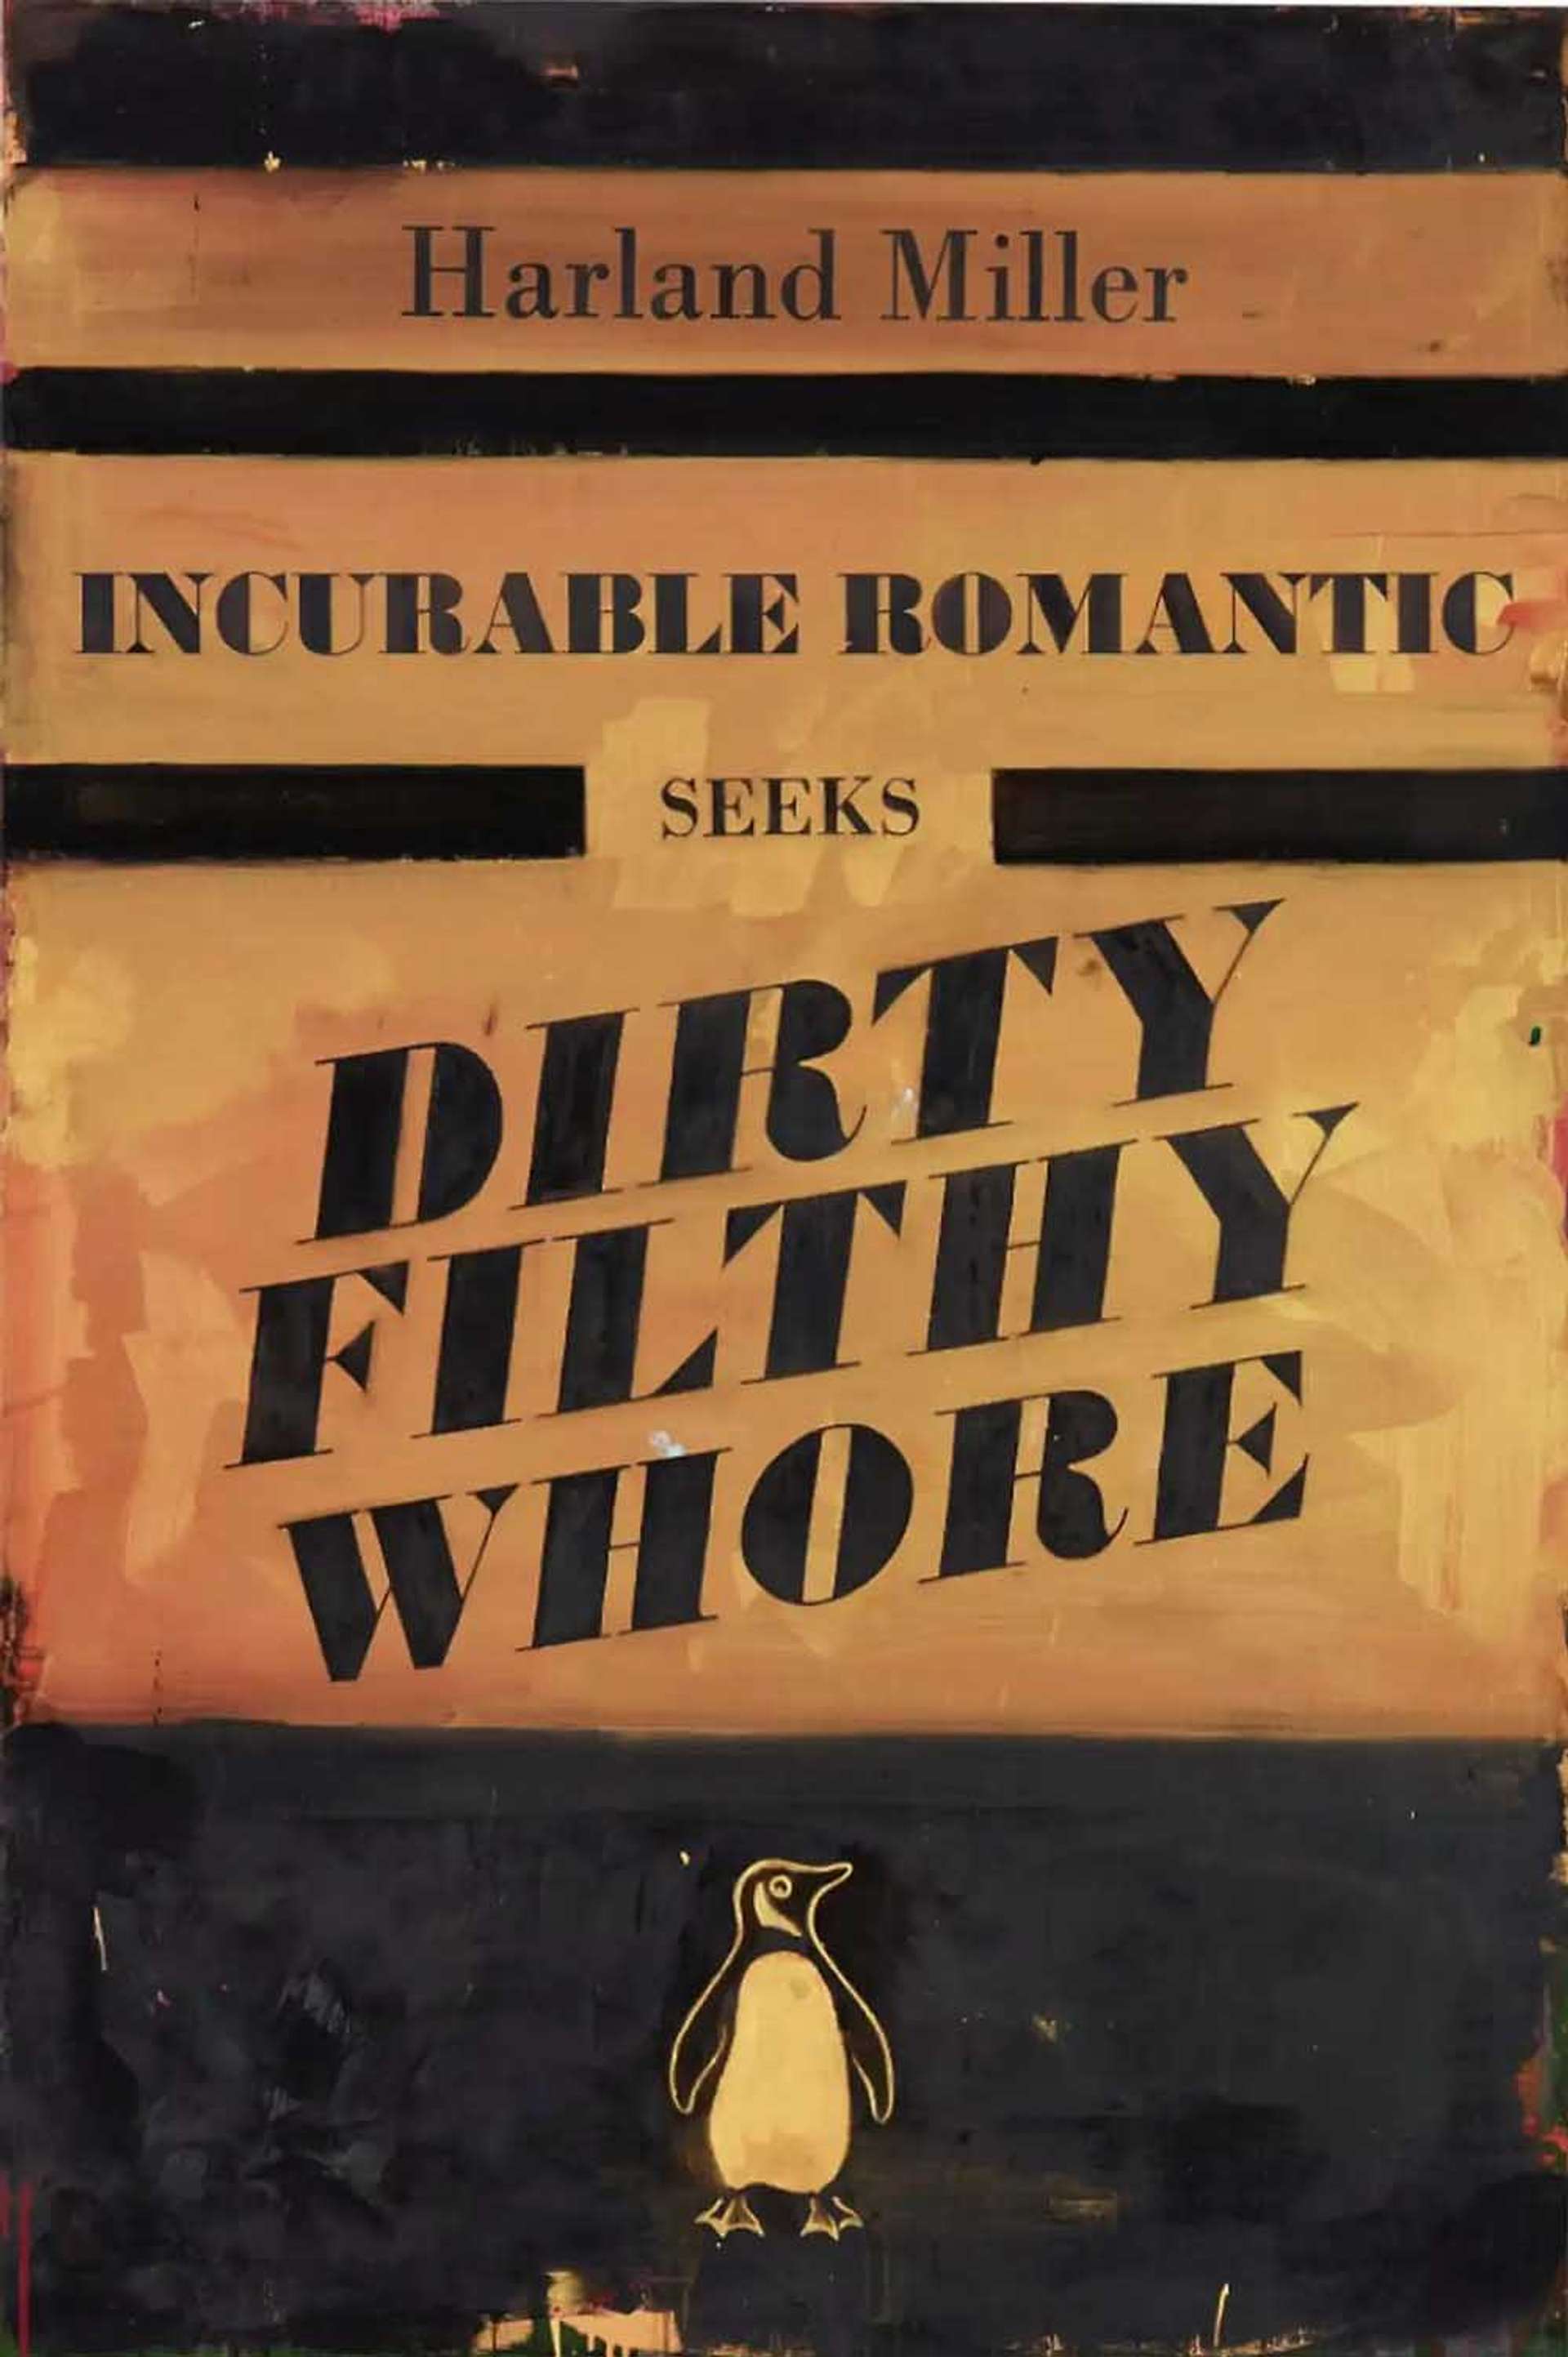 Incurable Romantic Seeks Dirty Filthy Whore by Harland Miller